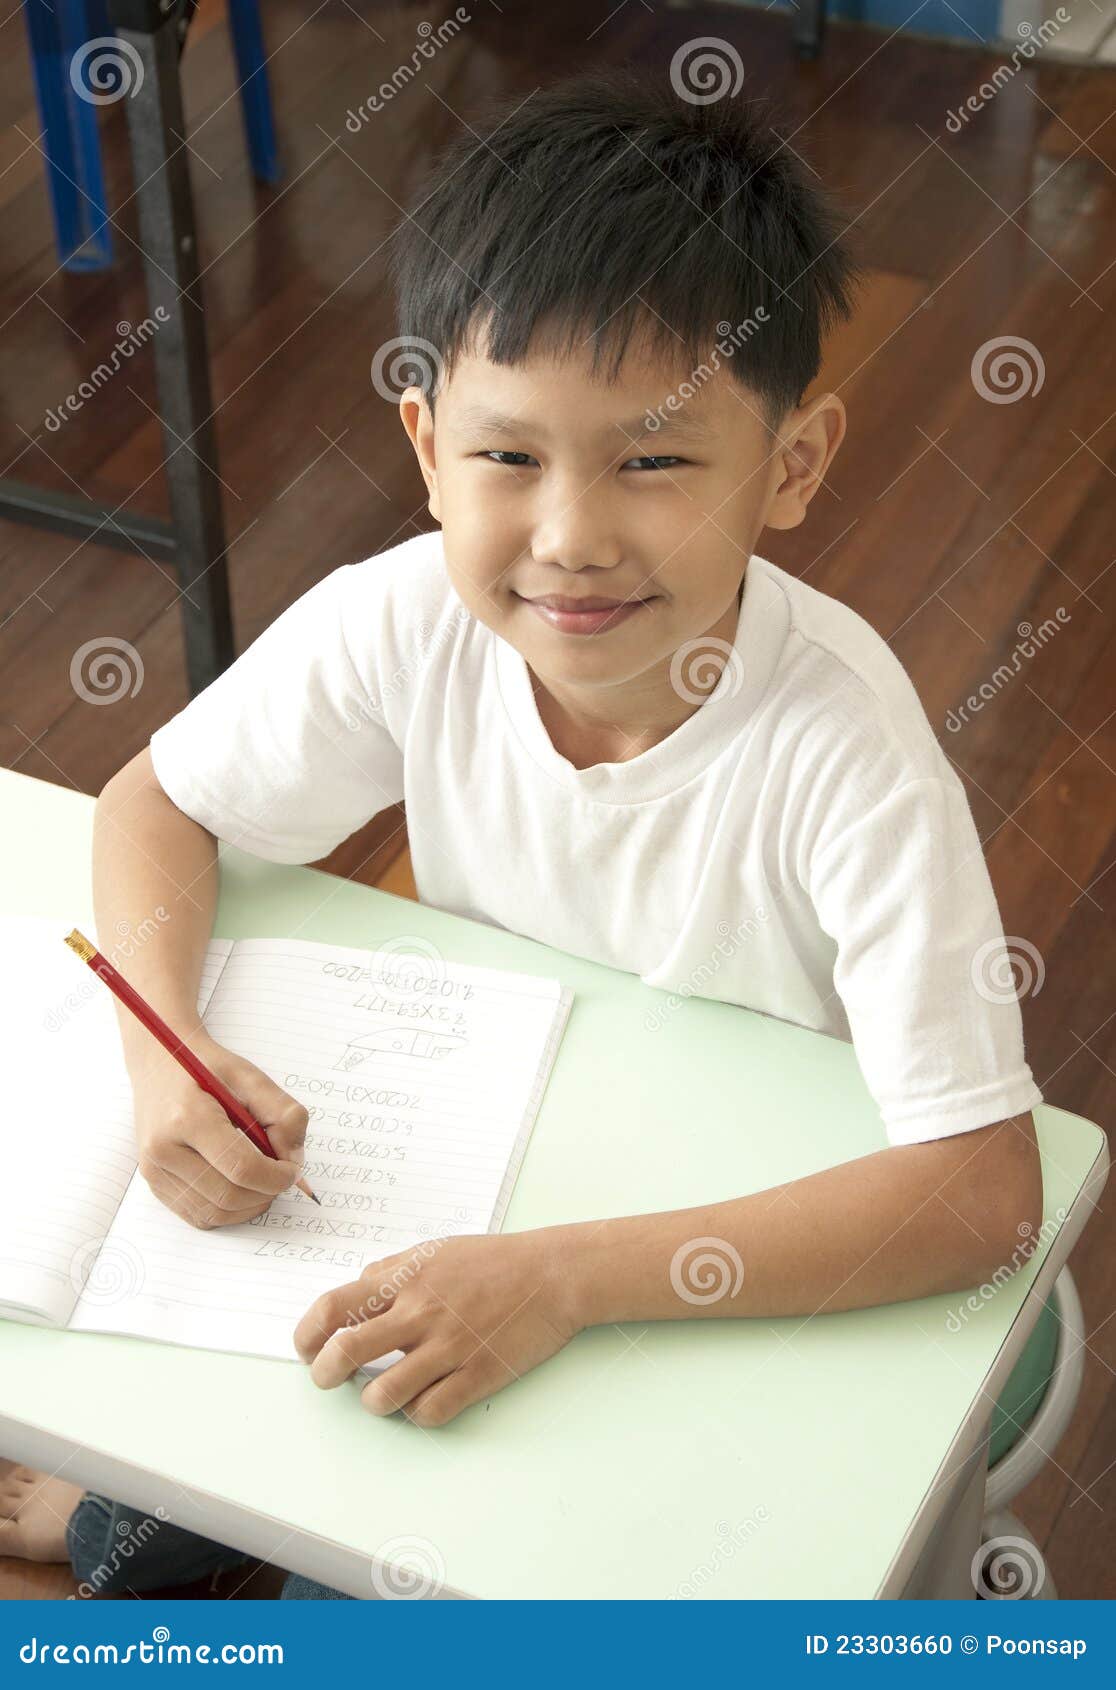 Asian Boy Against Fence With Sad Expression Stock Photo 